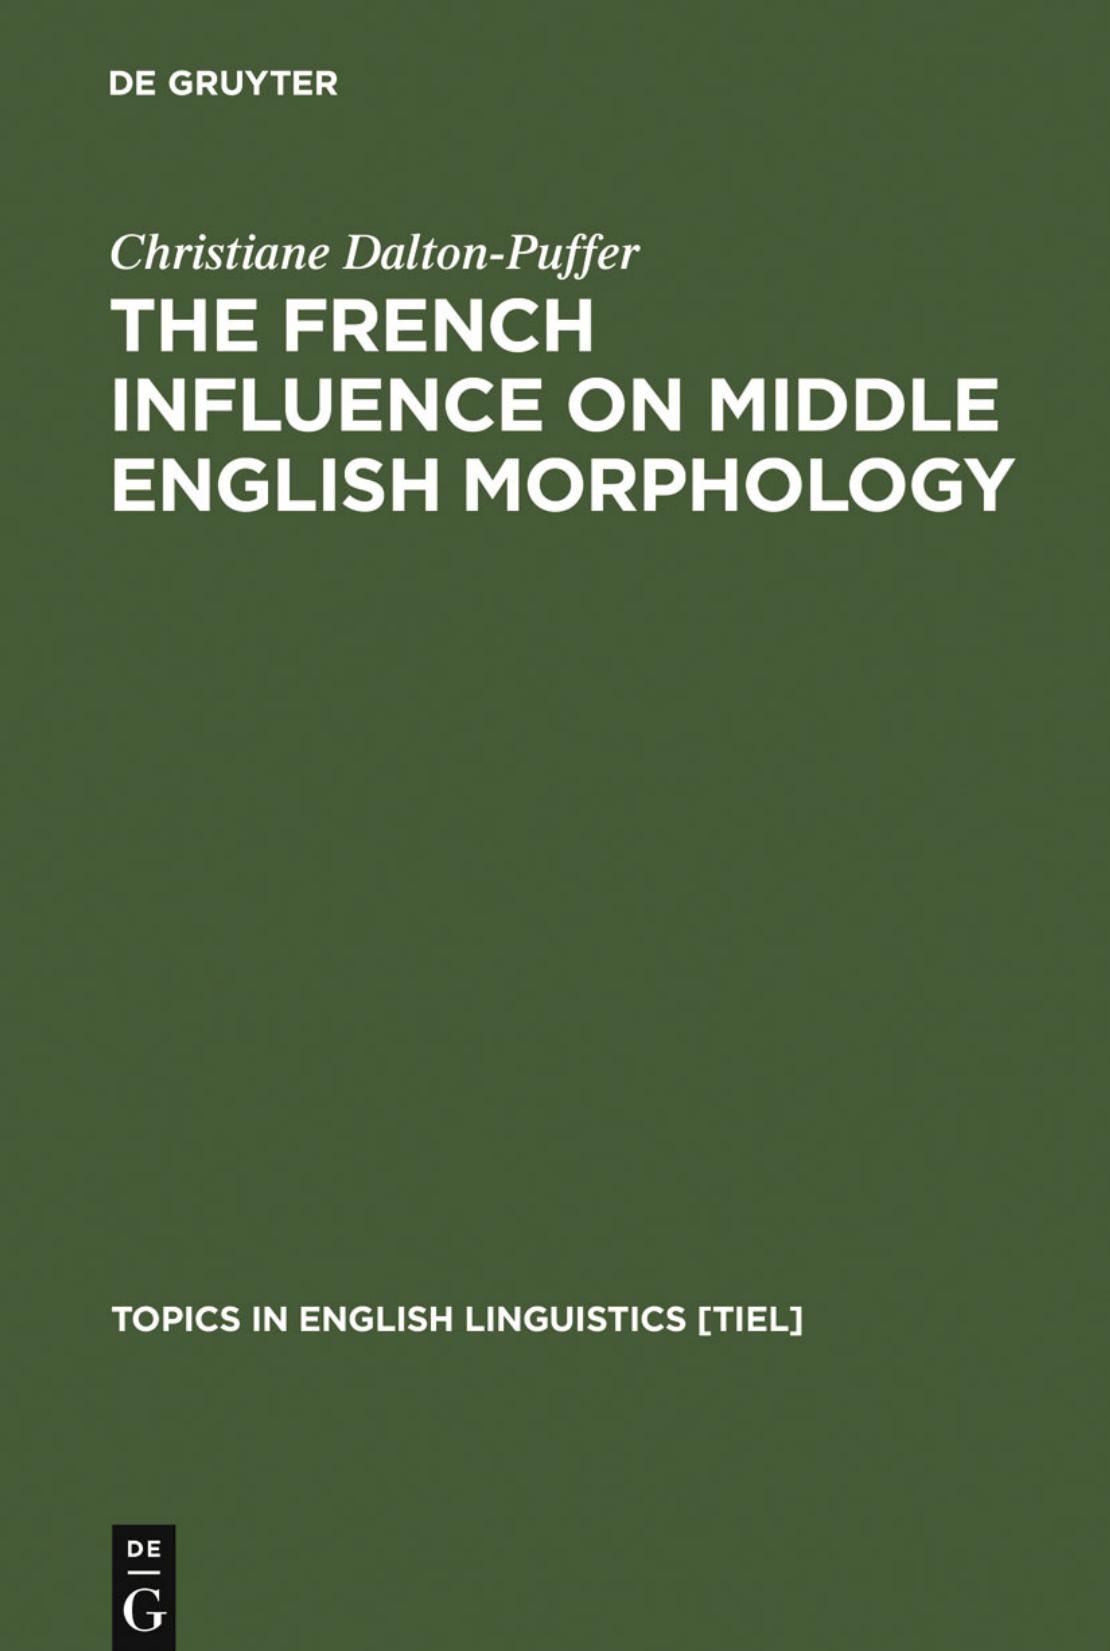 The French Influence on Middle English Morphology: A Corpus-Based Study on Derivation